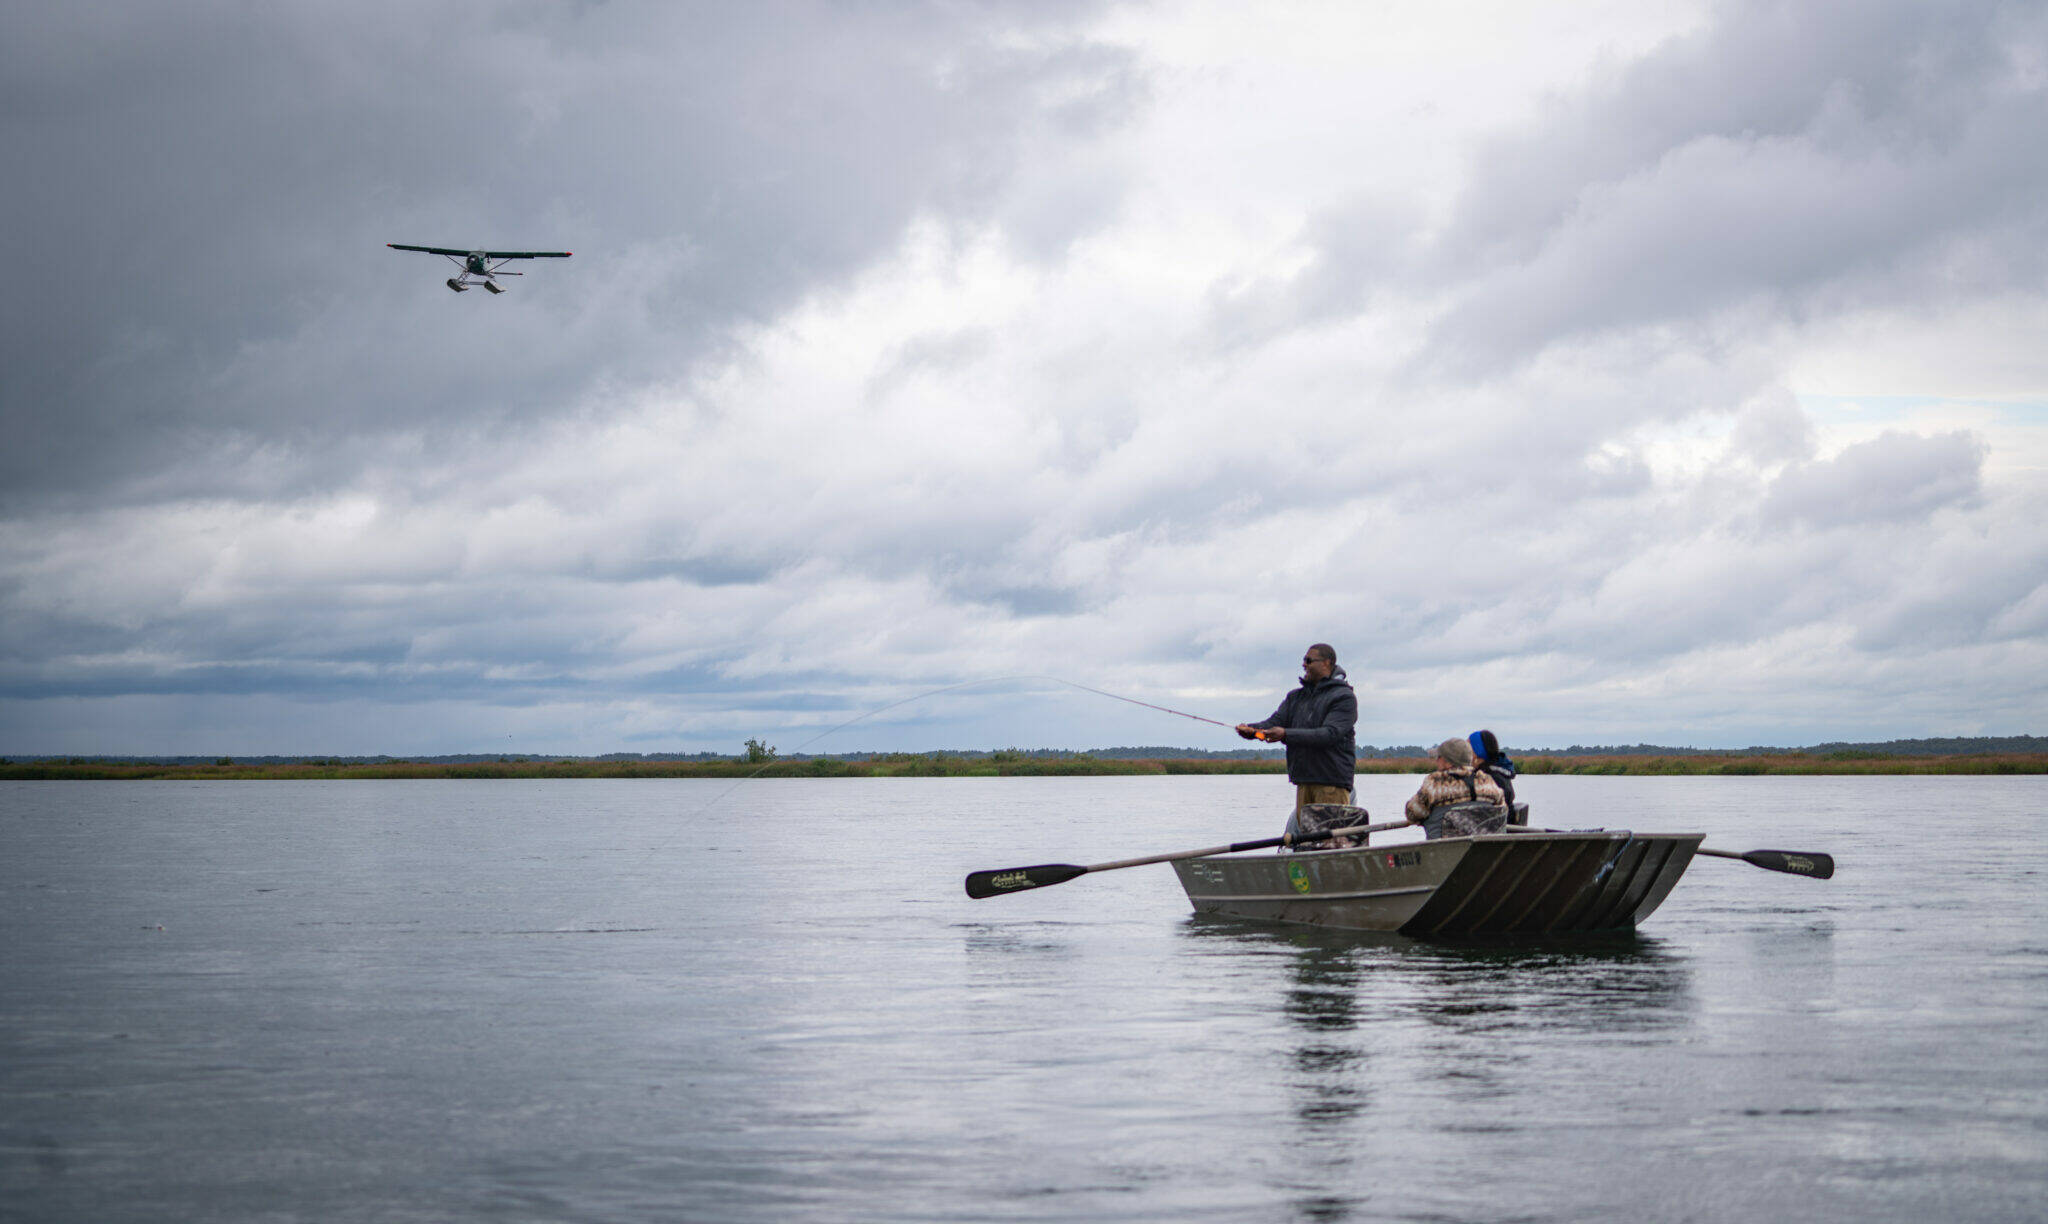 Michael Regan, administrator of the Environmental Protection Agency, fishes from a skiff on Sept. 28 during a visit to the Bristol Bay village of Igiugig. (Photo provided by Environmental Protection Agency)